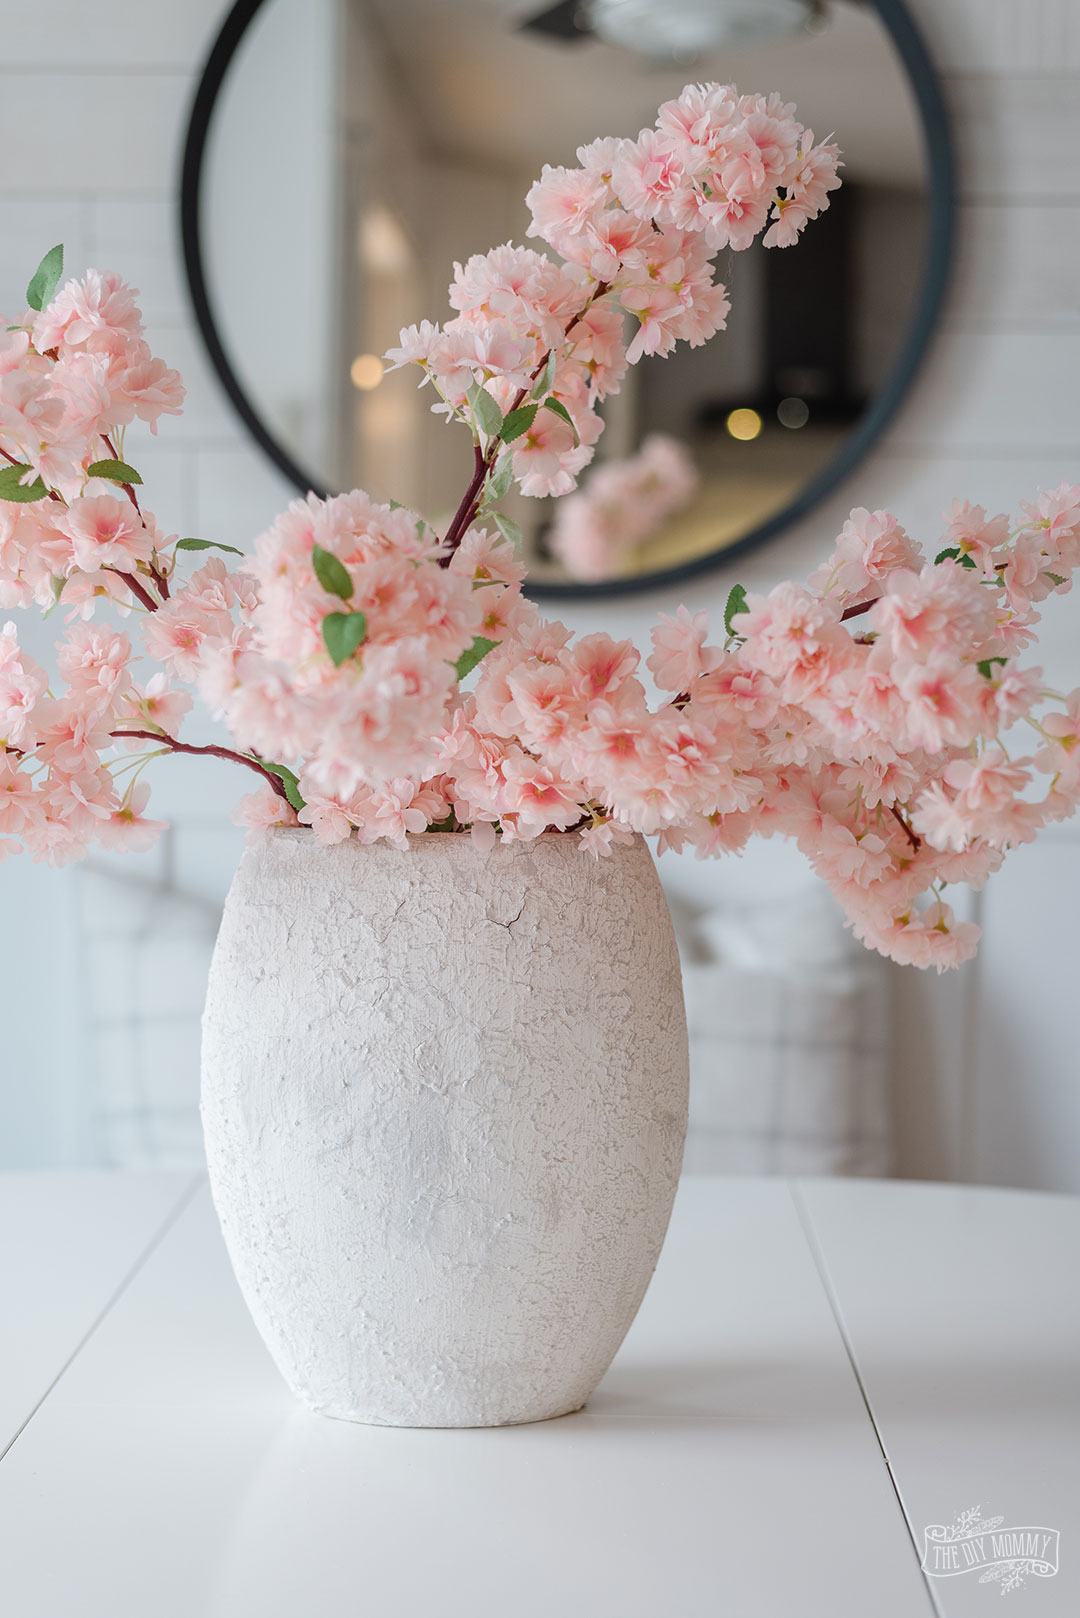 How to make a textured vase with DIY plaster paint